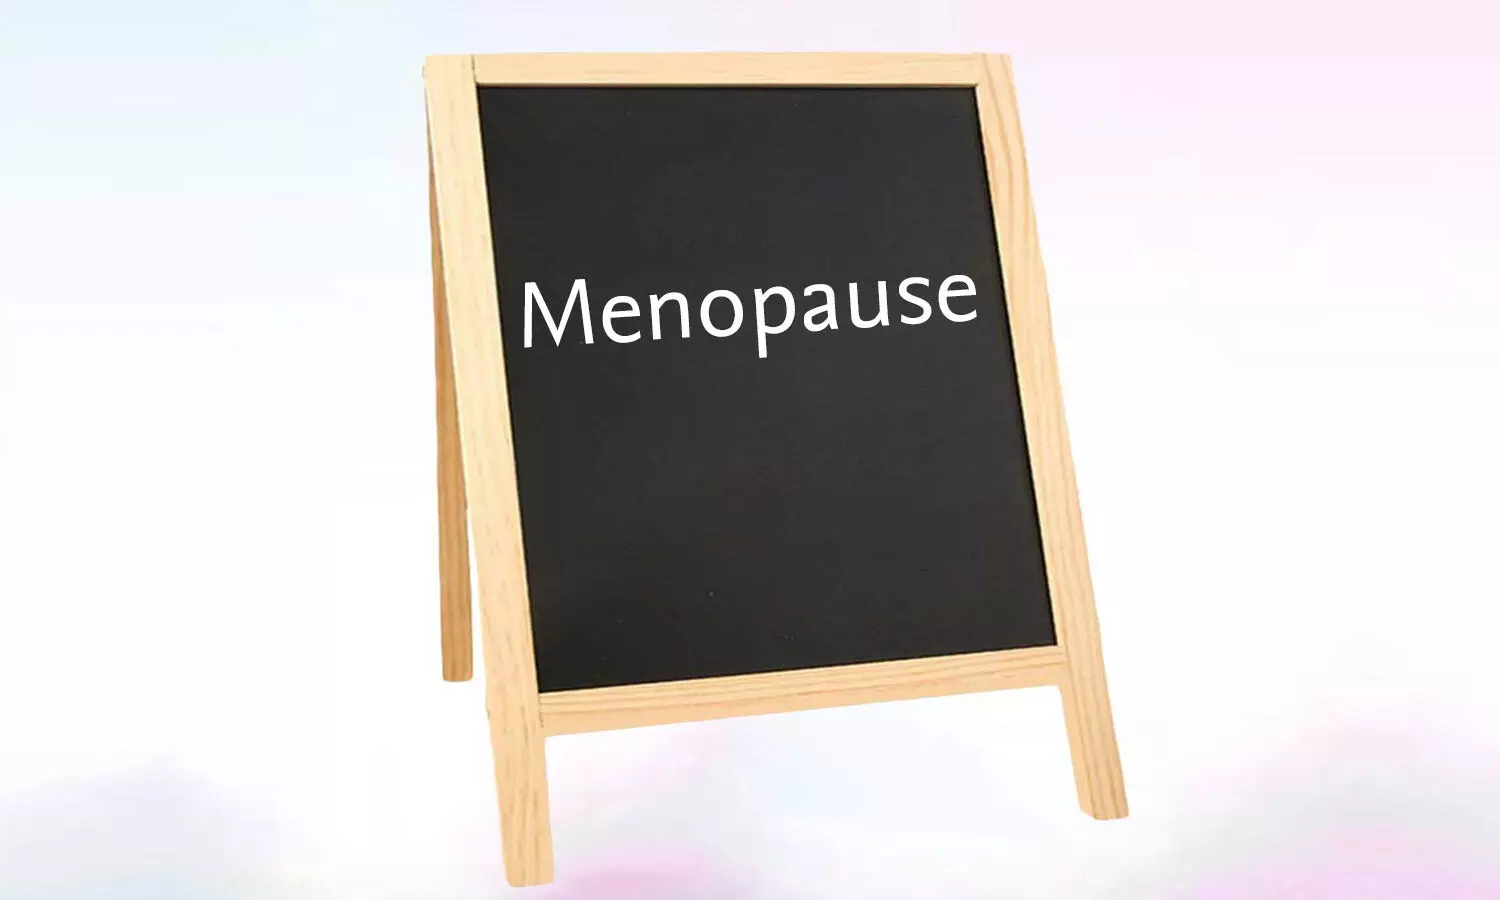 Increased fat distribution during menopause increases diabetes risk